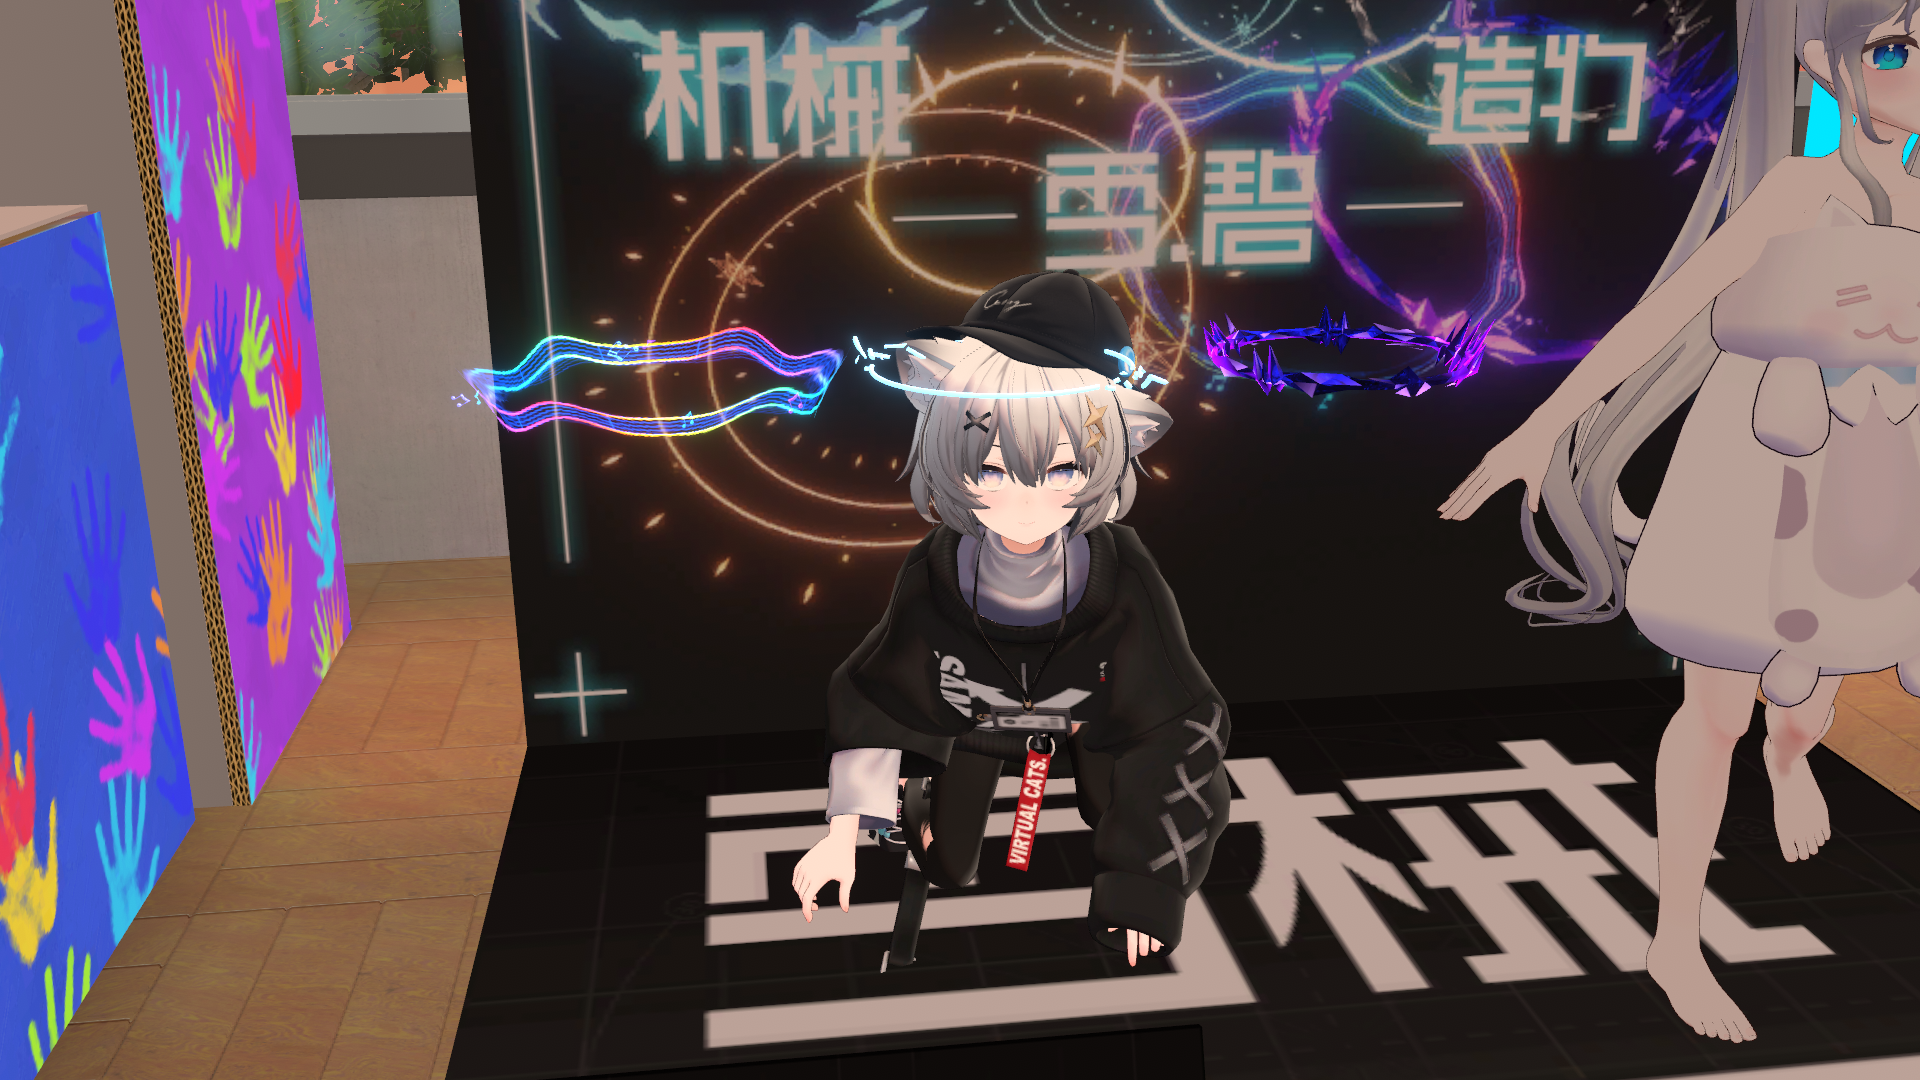 VRChat_1920x1080_2021-12-05_02-01-33.564.png